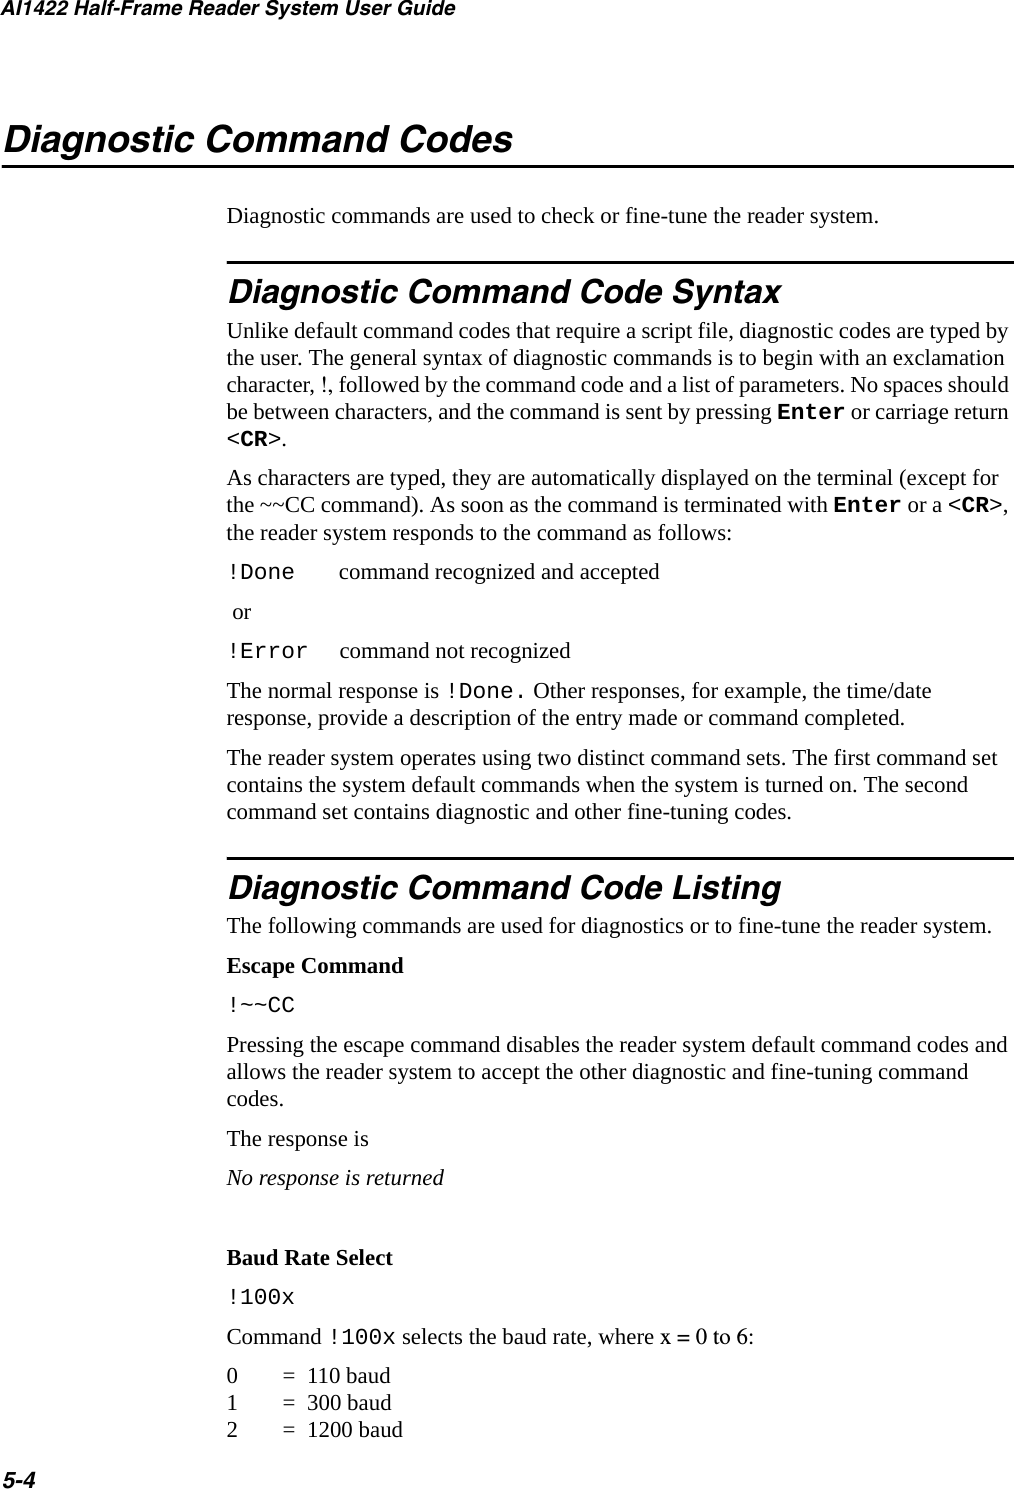 AI1422 Half-Frame Reader System User Guide5-4Diagnostic Command CodesDiagnostic commands are used to check or fine-tune the reader system.Diagnostic Command Code SyntaxUnlike default command codes that require a script file, diagnostic codes are typed by the user. The general syntax of diagnostic commands is to begin with an exclamation character, !, followed by the command code and a list of parameters. No spaces should be between characters, and the command is sent by pressing Enter or carriage return &lt;CR&gt;.As characters are typed, they are automatically displayed on the terminal (except for the ~~CC command). As soon as the command is terminated with Enter or a &lt;CR&gt;, the reader system responds to the command as follows:!Done command recognized and accepted or!Error command not recognizedThe normal response is !Done. Other responses, for example, the time/date response, provide a description of the entry made or command completed.The reader system operates using two distinct command sets. The first command set contains the system default commands when the system is turned on. The second command set contains diagnostic and other fine-tuning codes.Diagnostic Command Code ListingThe following commands are used for diagnostics or to fine-tune the reader system.Escape Command!~~CCPressing the escape command disables the reader system default command codes and allows the reader system to accept the other diagnostic and fine-tuning command codes.The response isNo response is returnedBaud Rate Select!100xCommand !100x selects the baud rate, where x = 0 to 6:0 =  110 baud 1 =  300 baud 2 =  1200 baud 